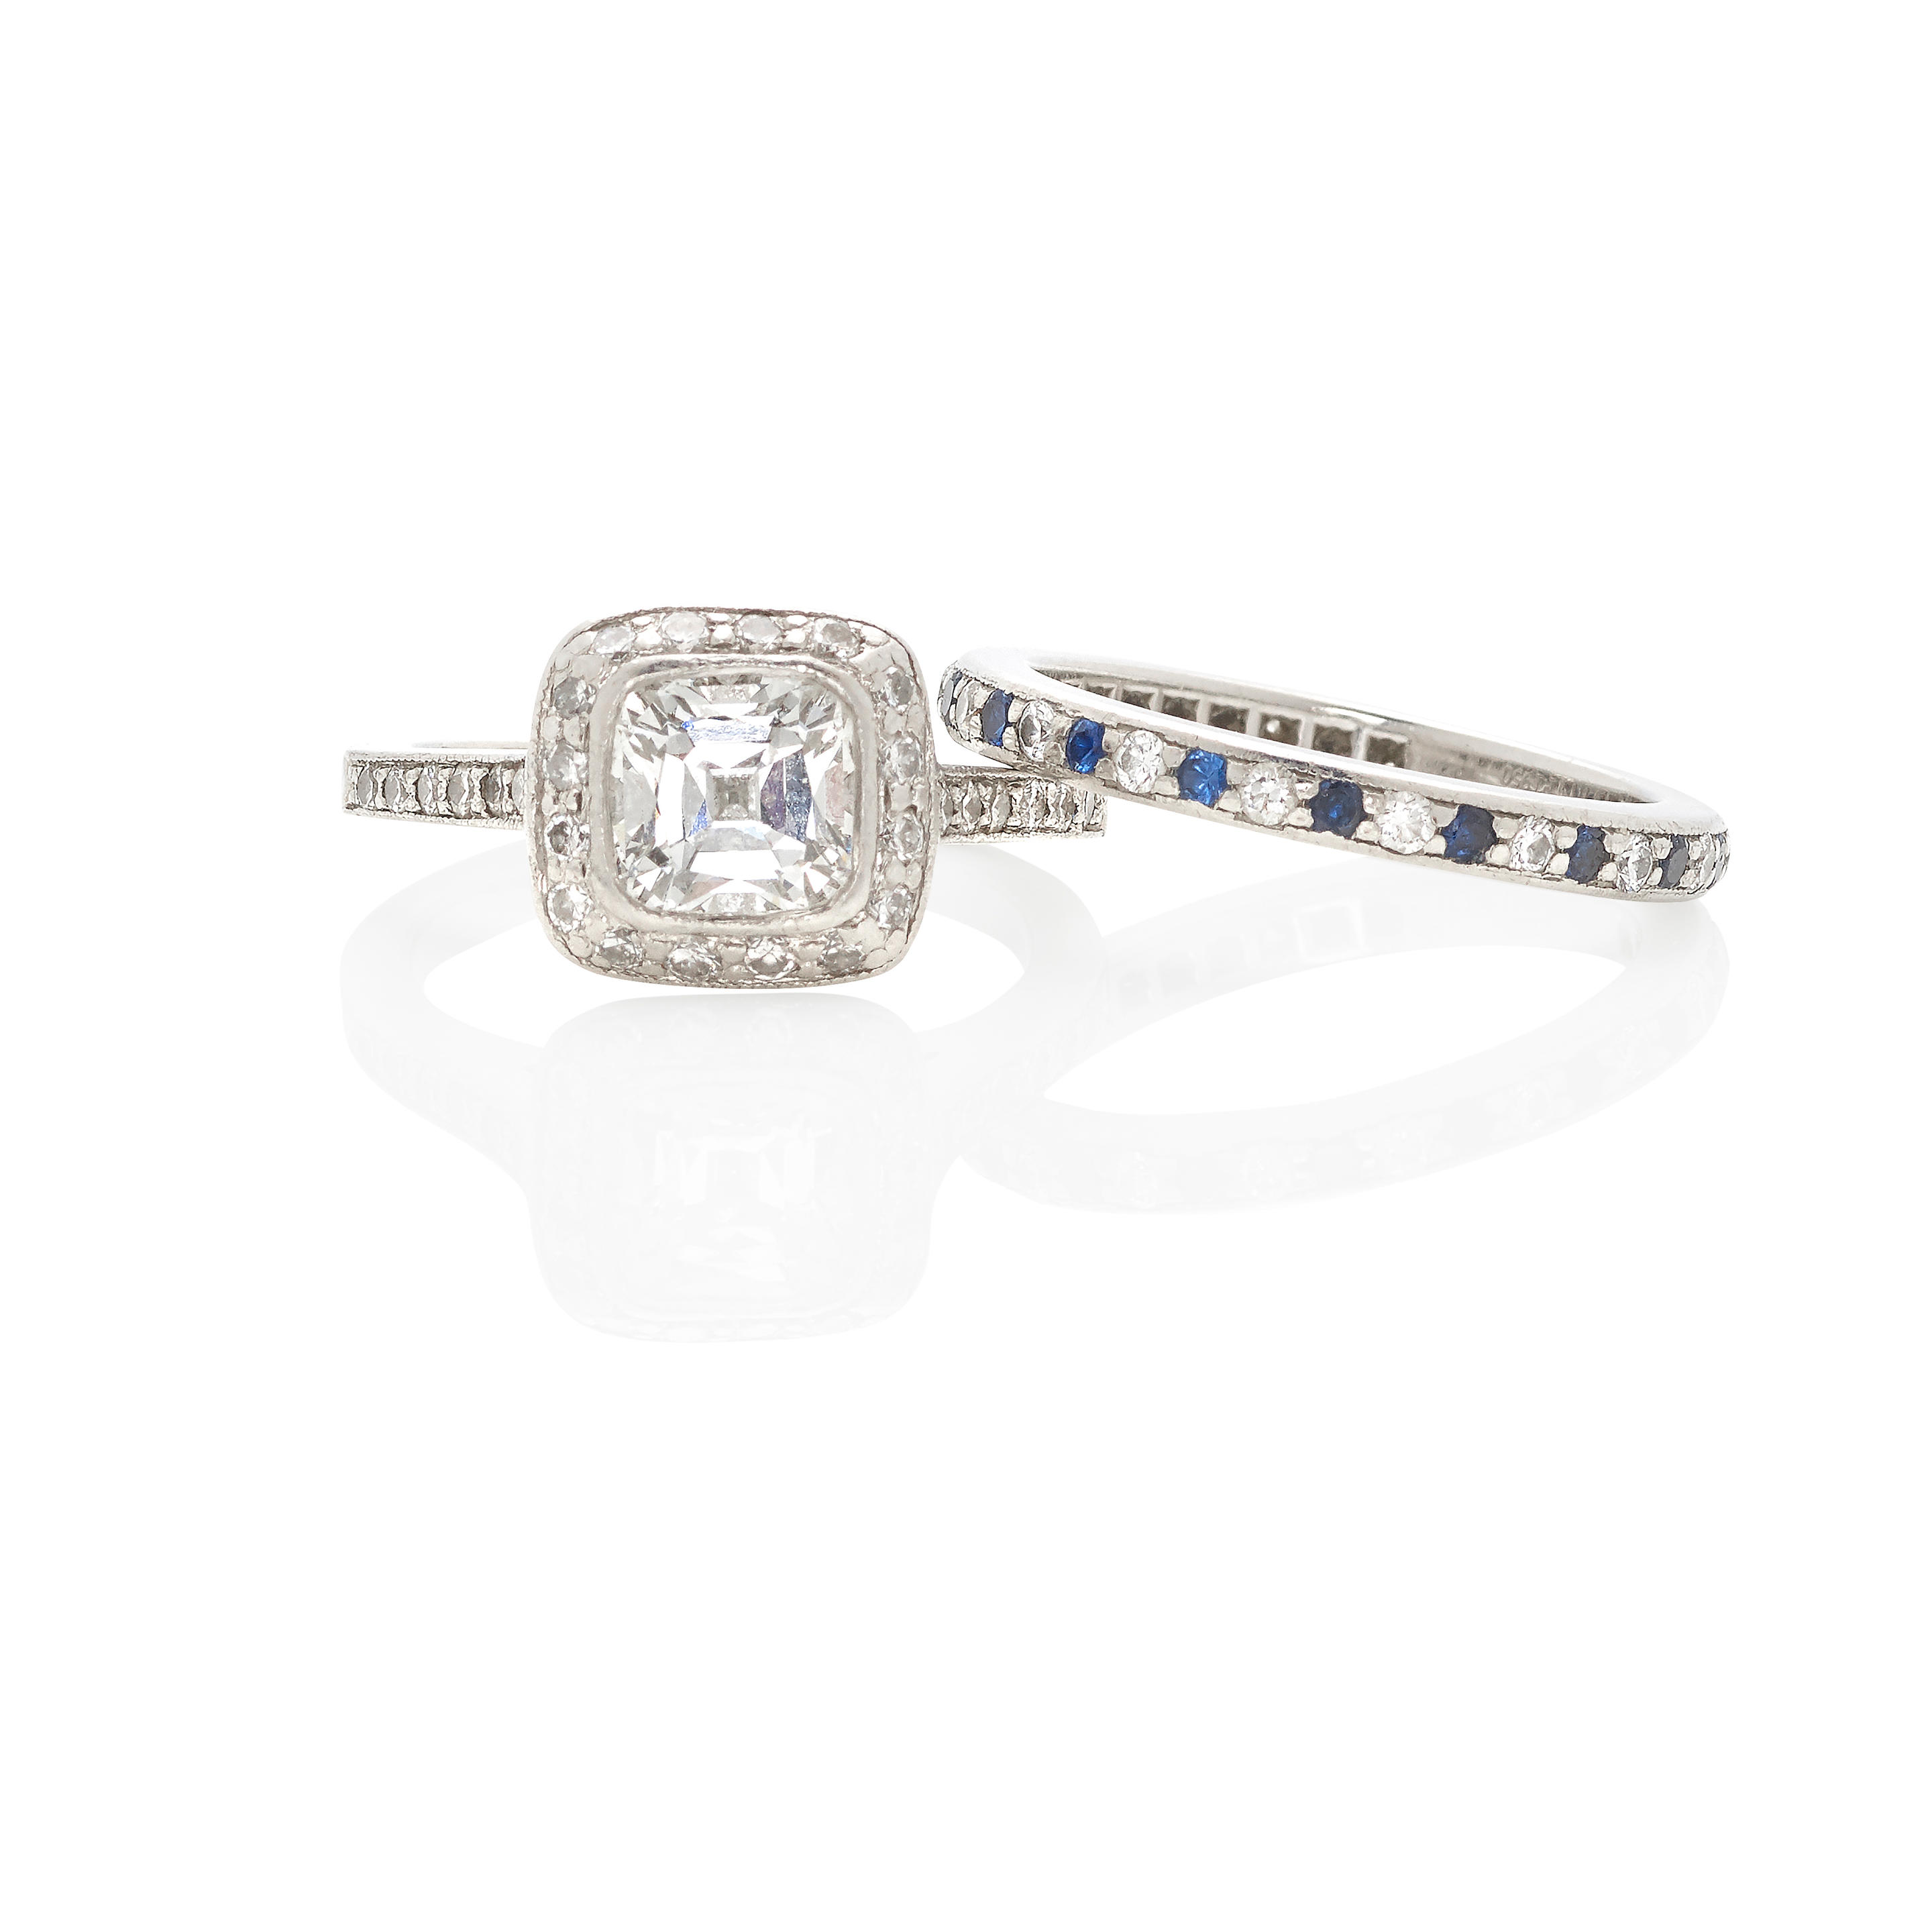 TIFFANY & CO.: PLATINUM AND DIAMOND RING TOGETHER WITH A DIAMOND AND...